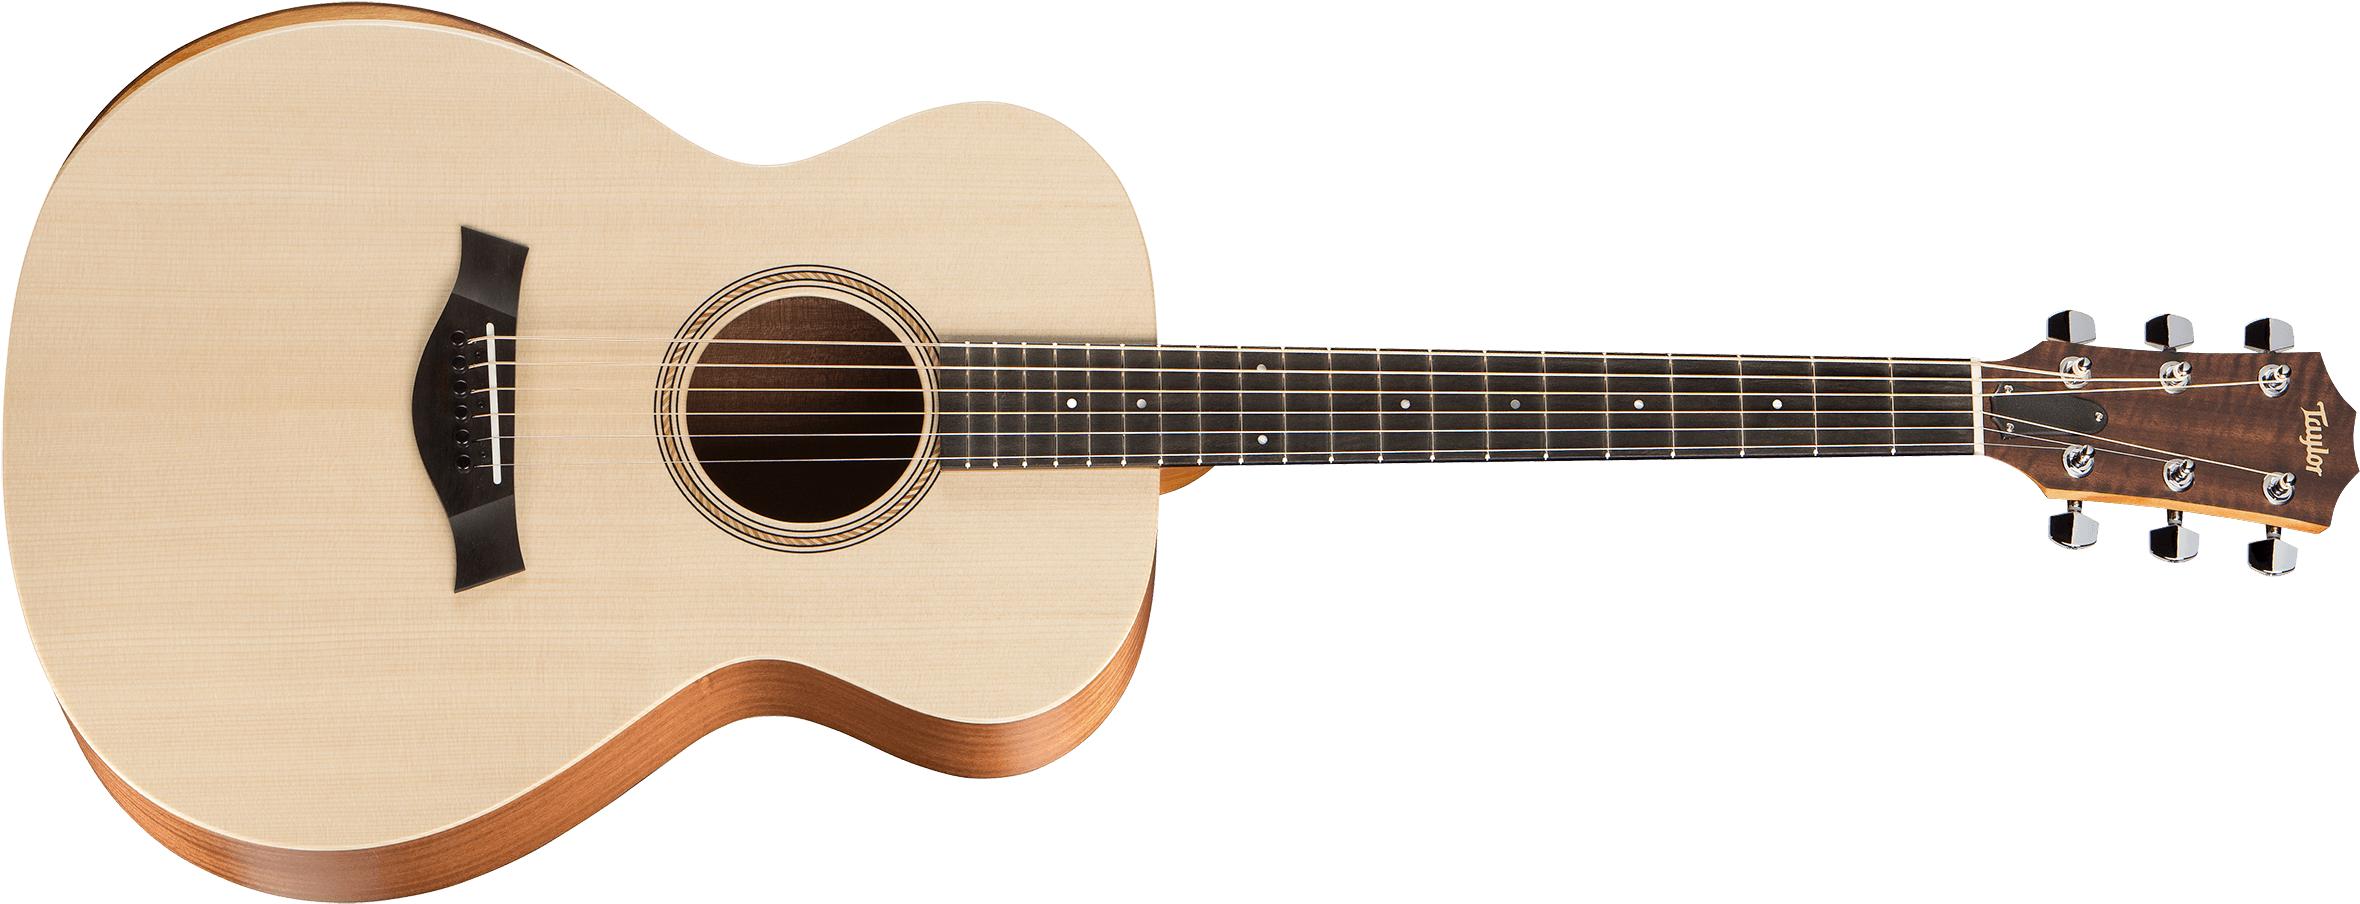 Taylor Academy 12 Grand Concert Acoustic Guitar Png